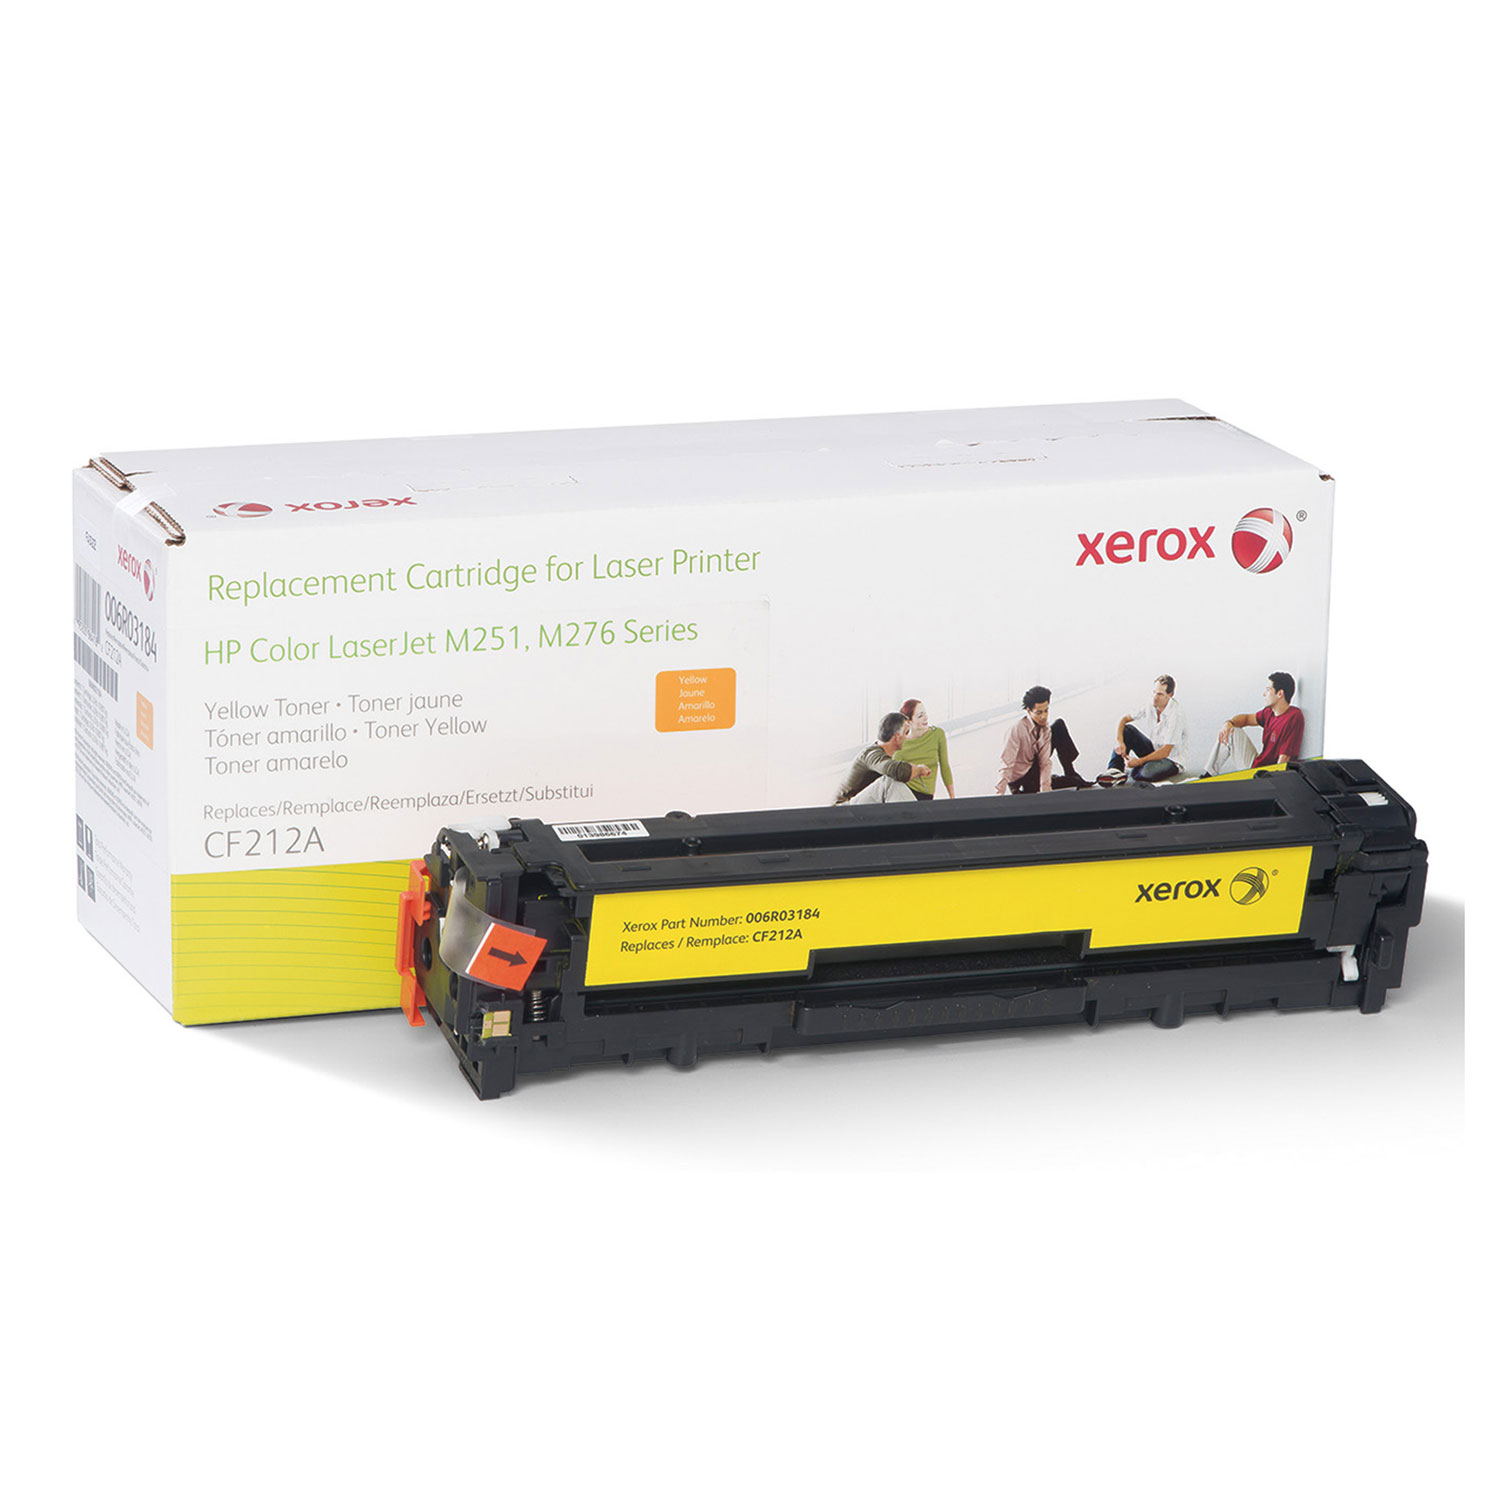  Xerox 006R03184 006R03184 Remanufactured CF212A (131A) Toner, 1800 Page-Yield, Yellow (XER006R03184) 